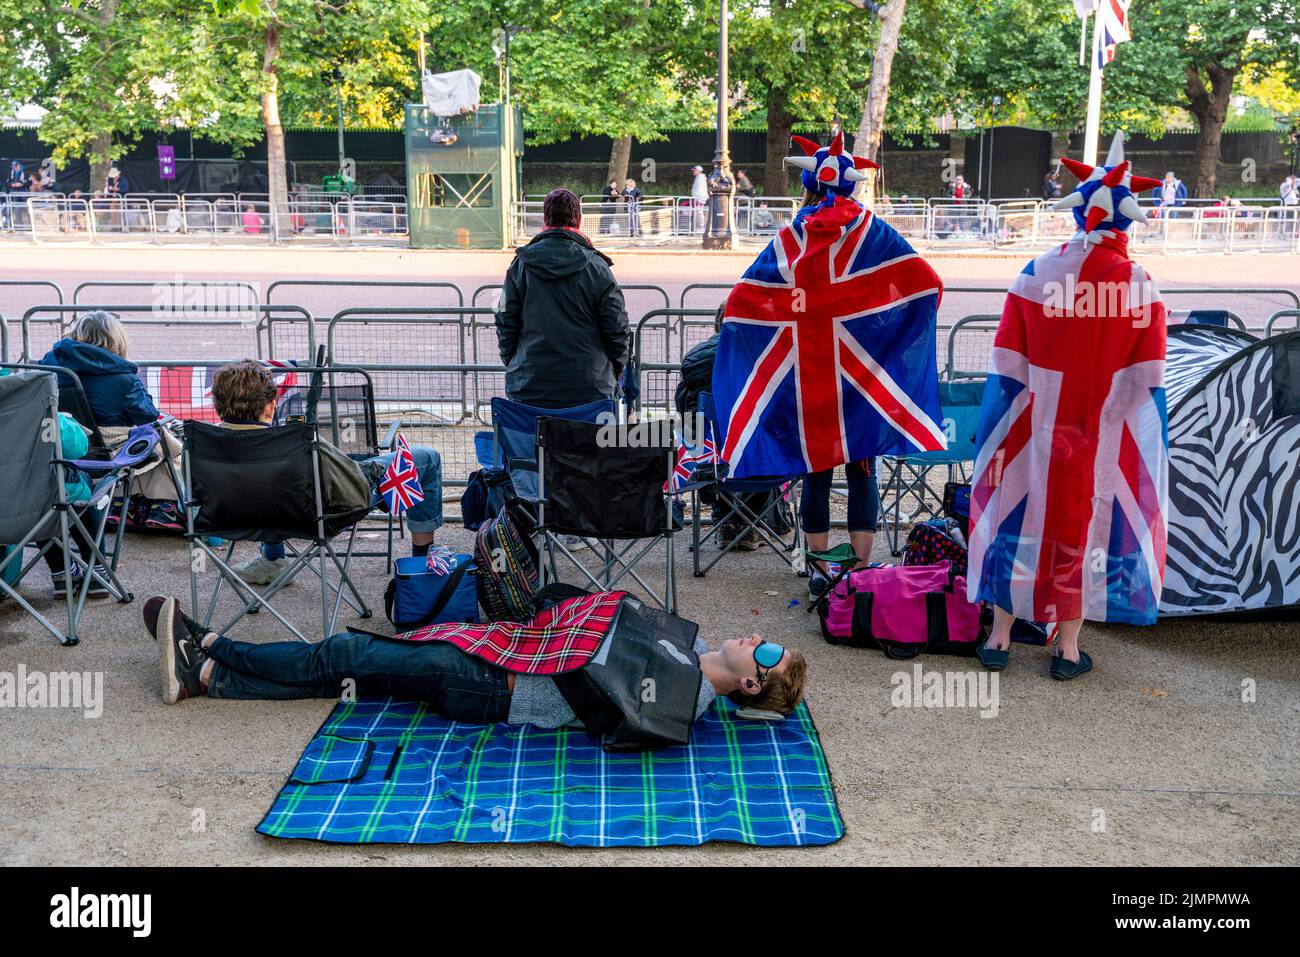 People Wake Up After Camping Out Overnight In The Mall To See The Queen's Birthday Parade During The Queen's Platinum Jubilee Celebrations, London, UK Stock Photo